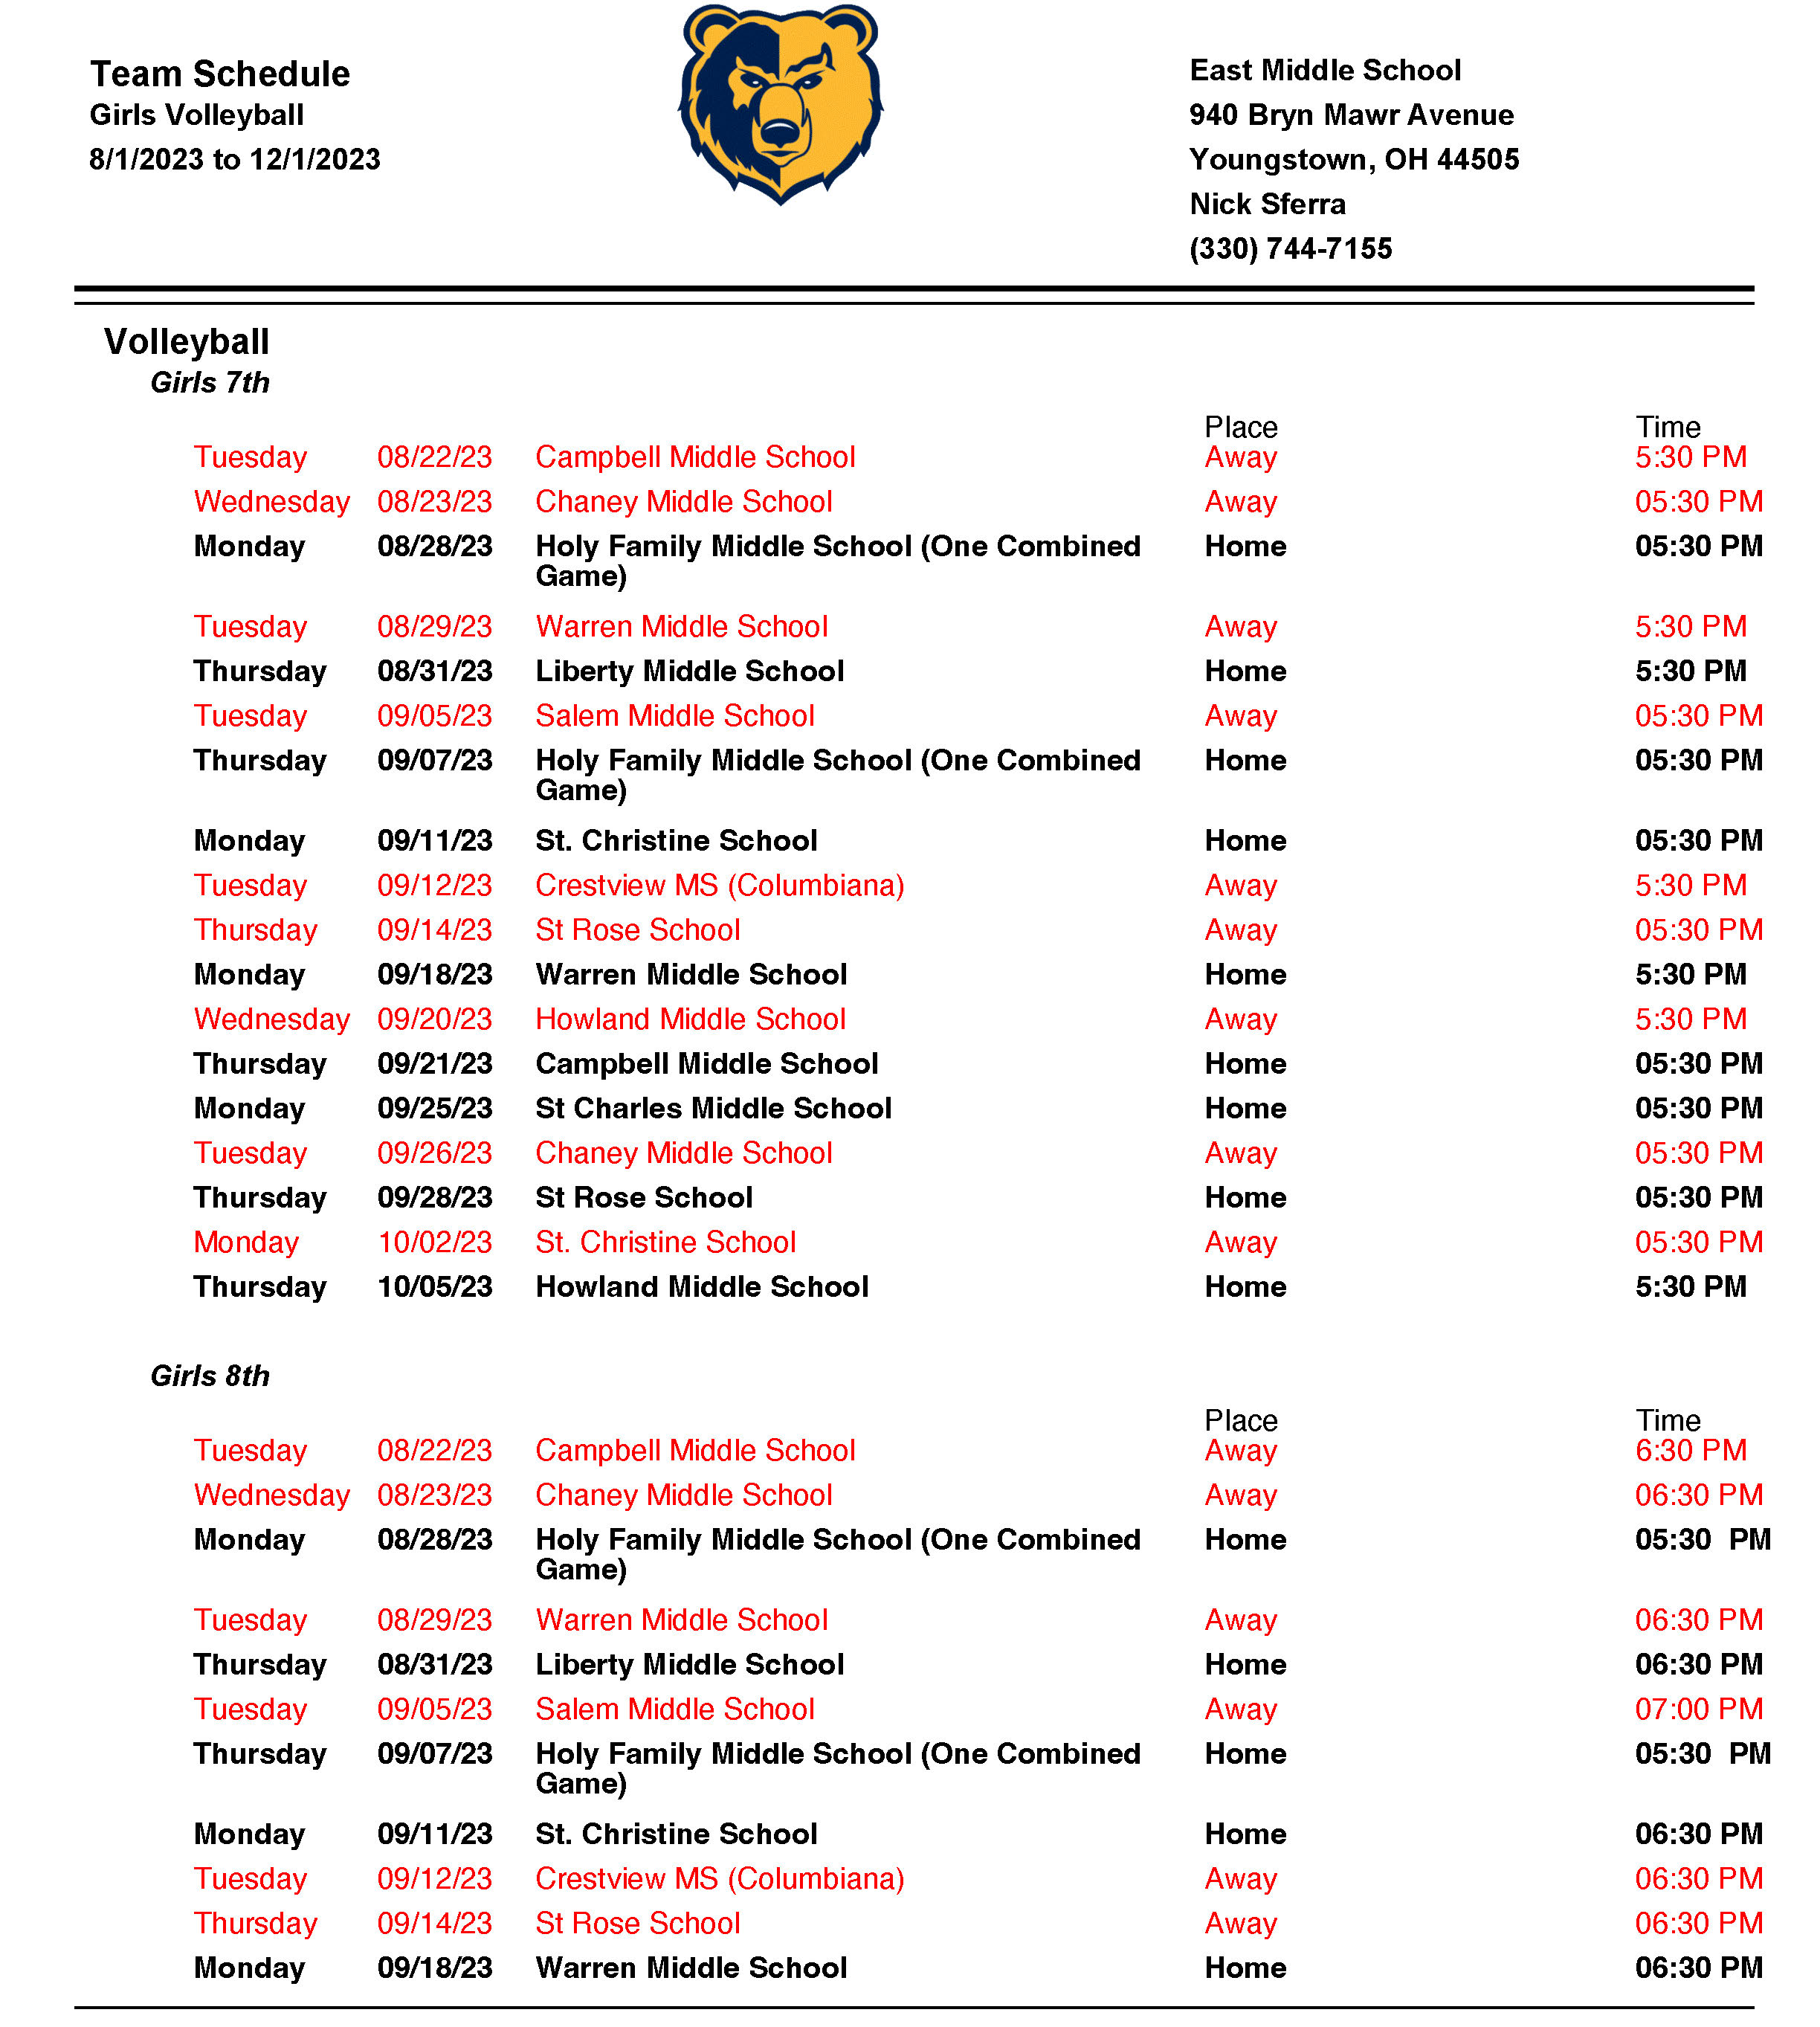 EMS Football Schedule 7th 8th